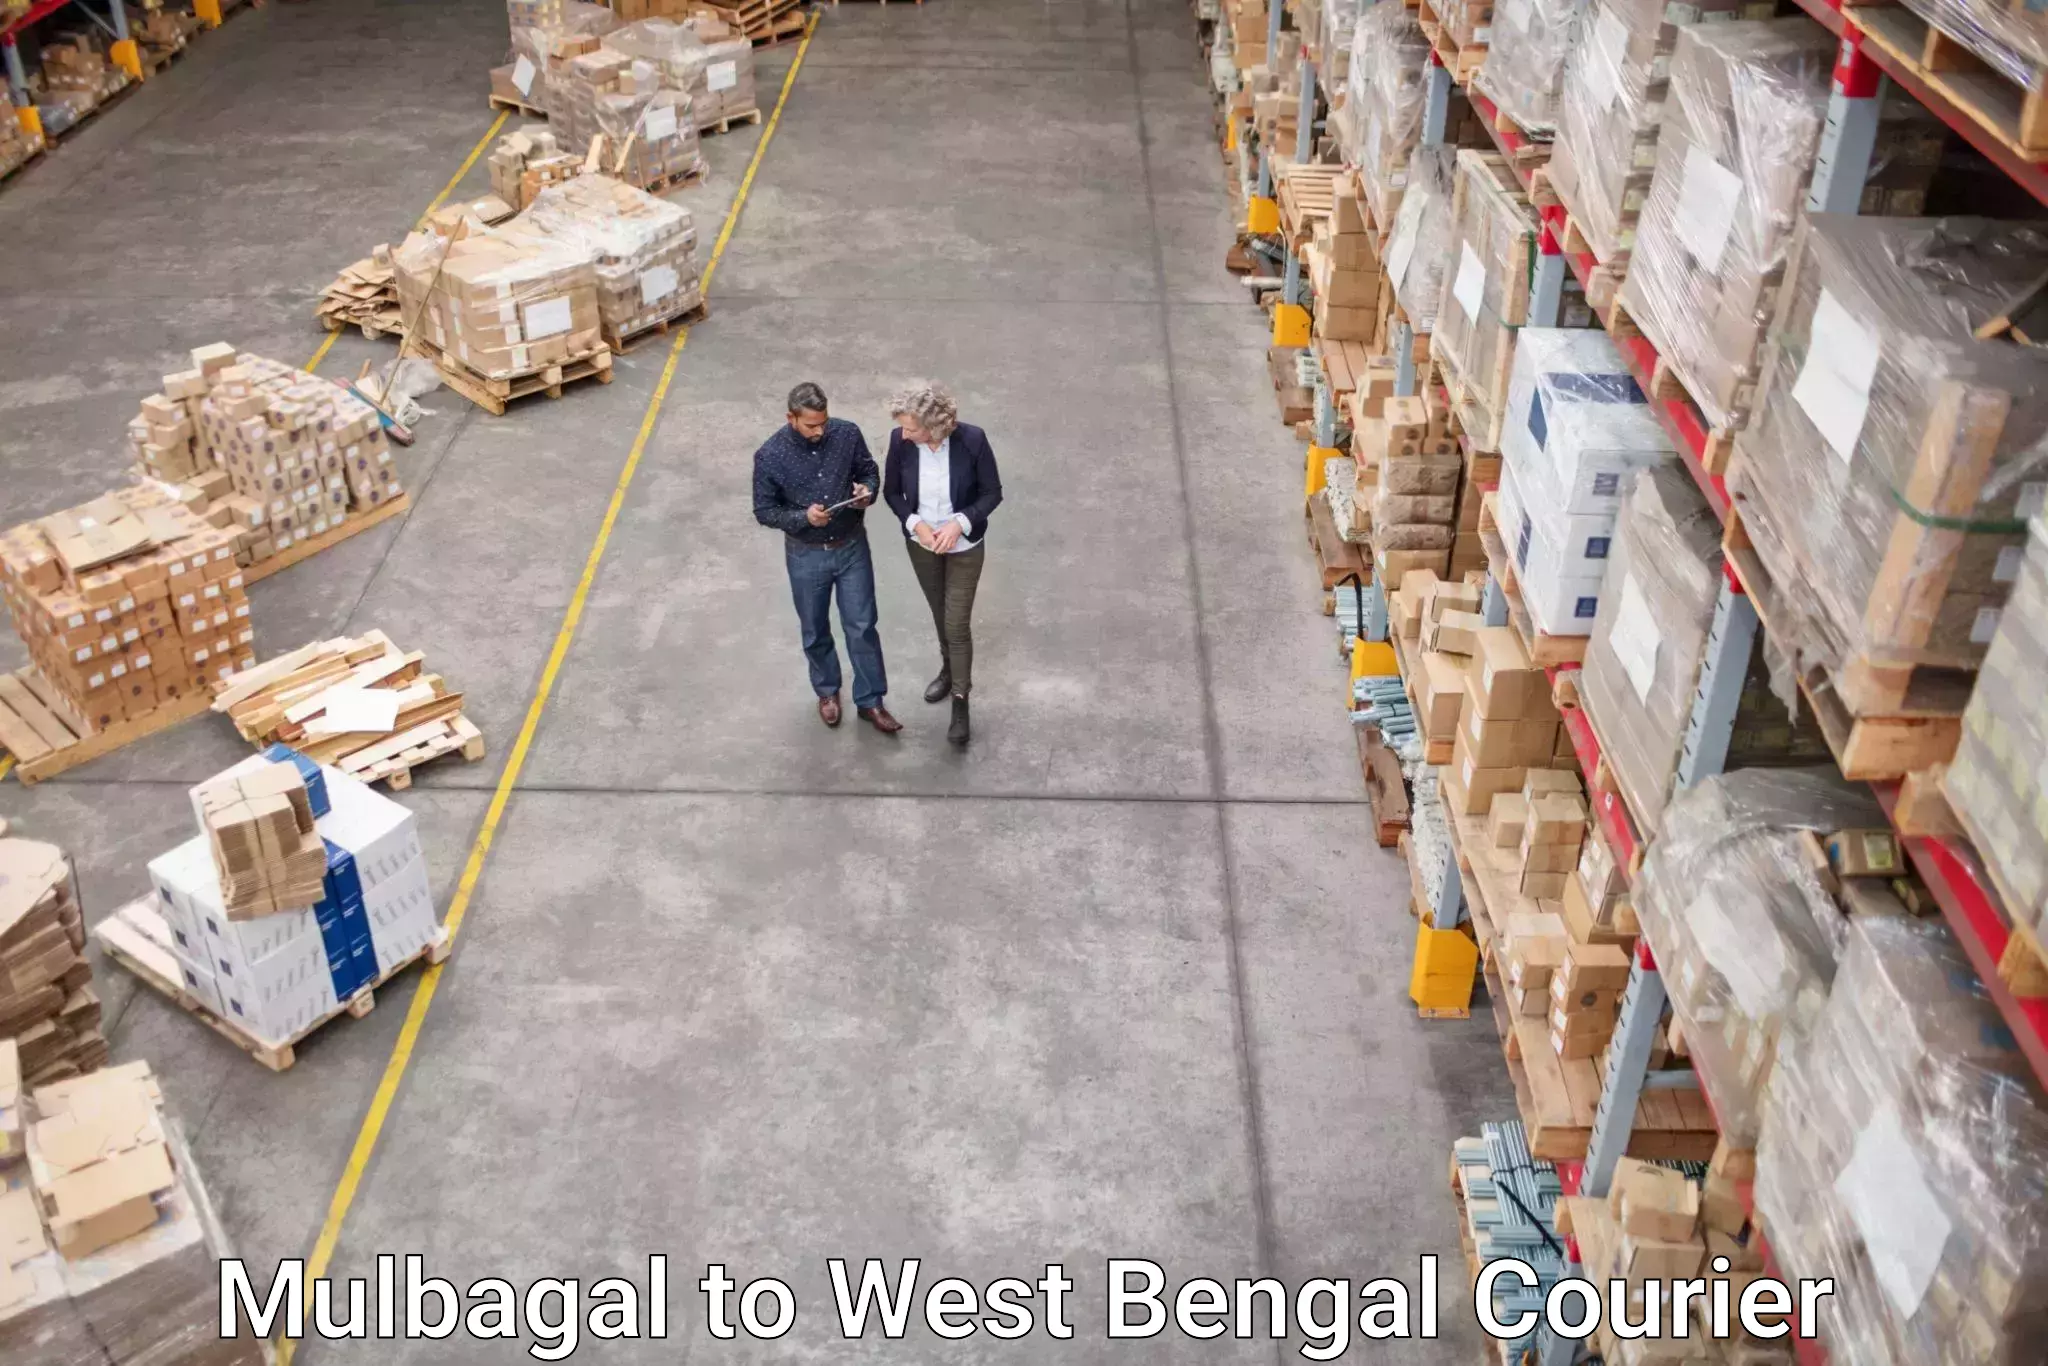 Express package delivery in Mulbagal to Alipore